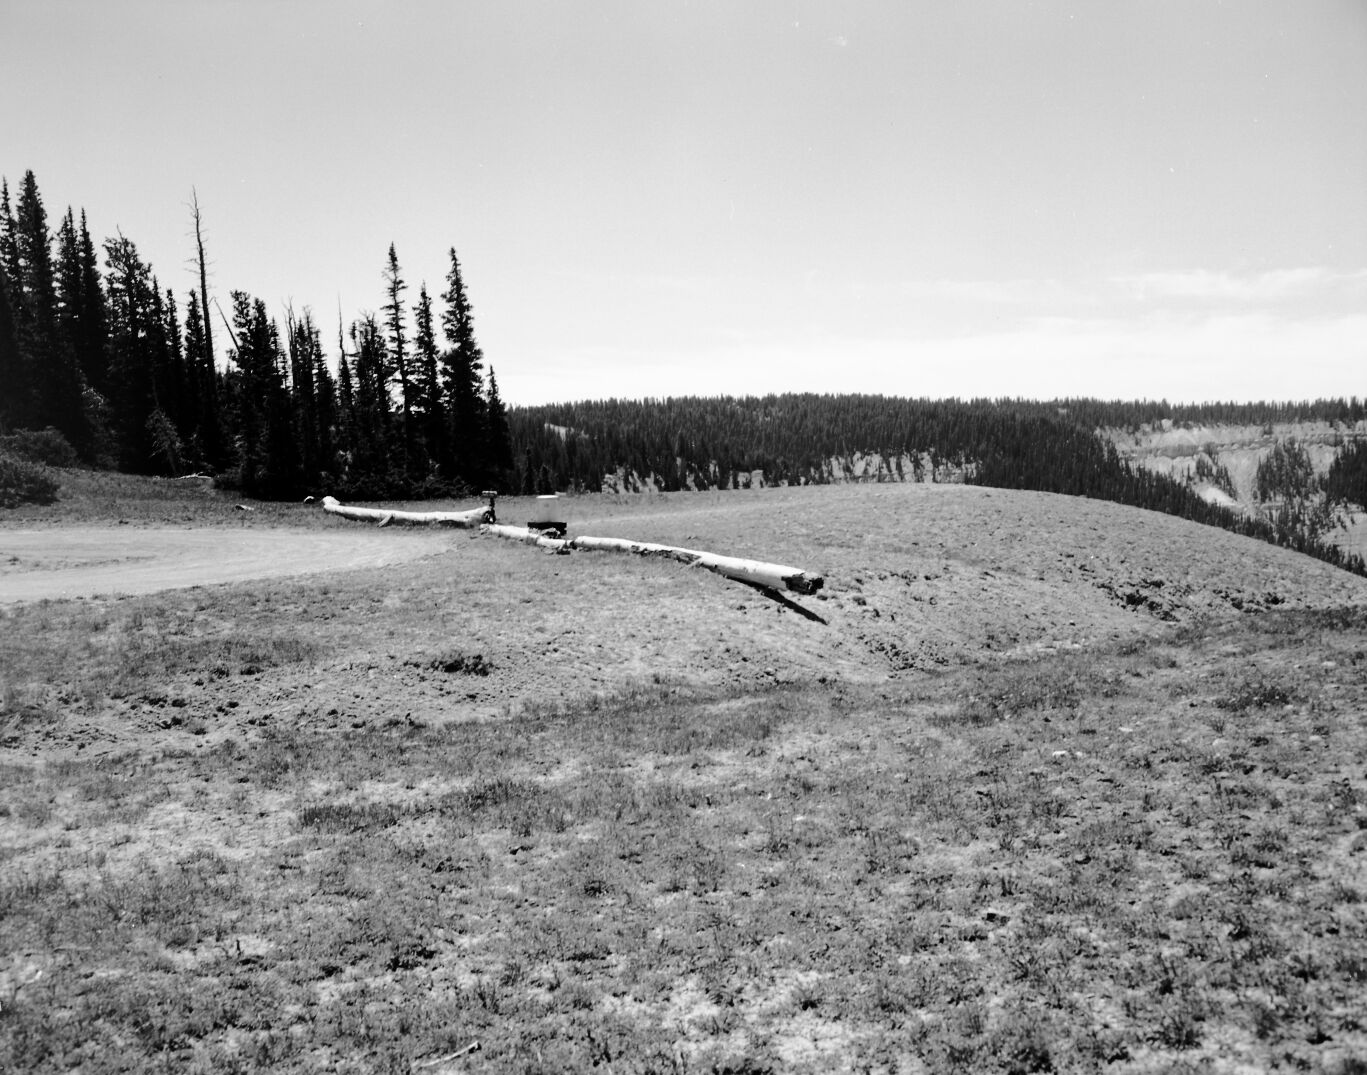 North view on the rim road at Cedar Breaks National Monument, before the 1960 construction project. Taken as a record of the project.